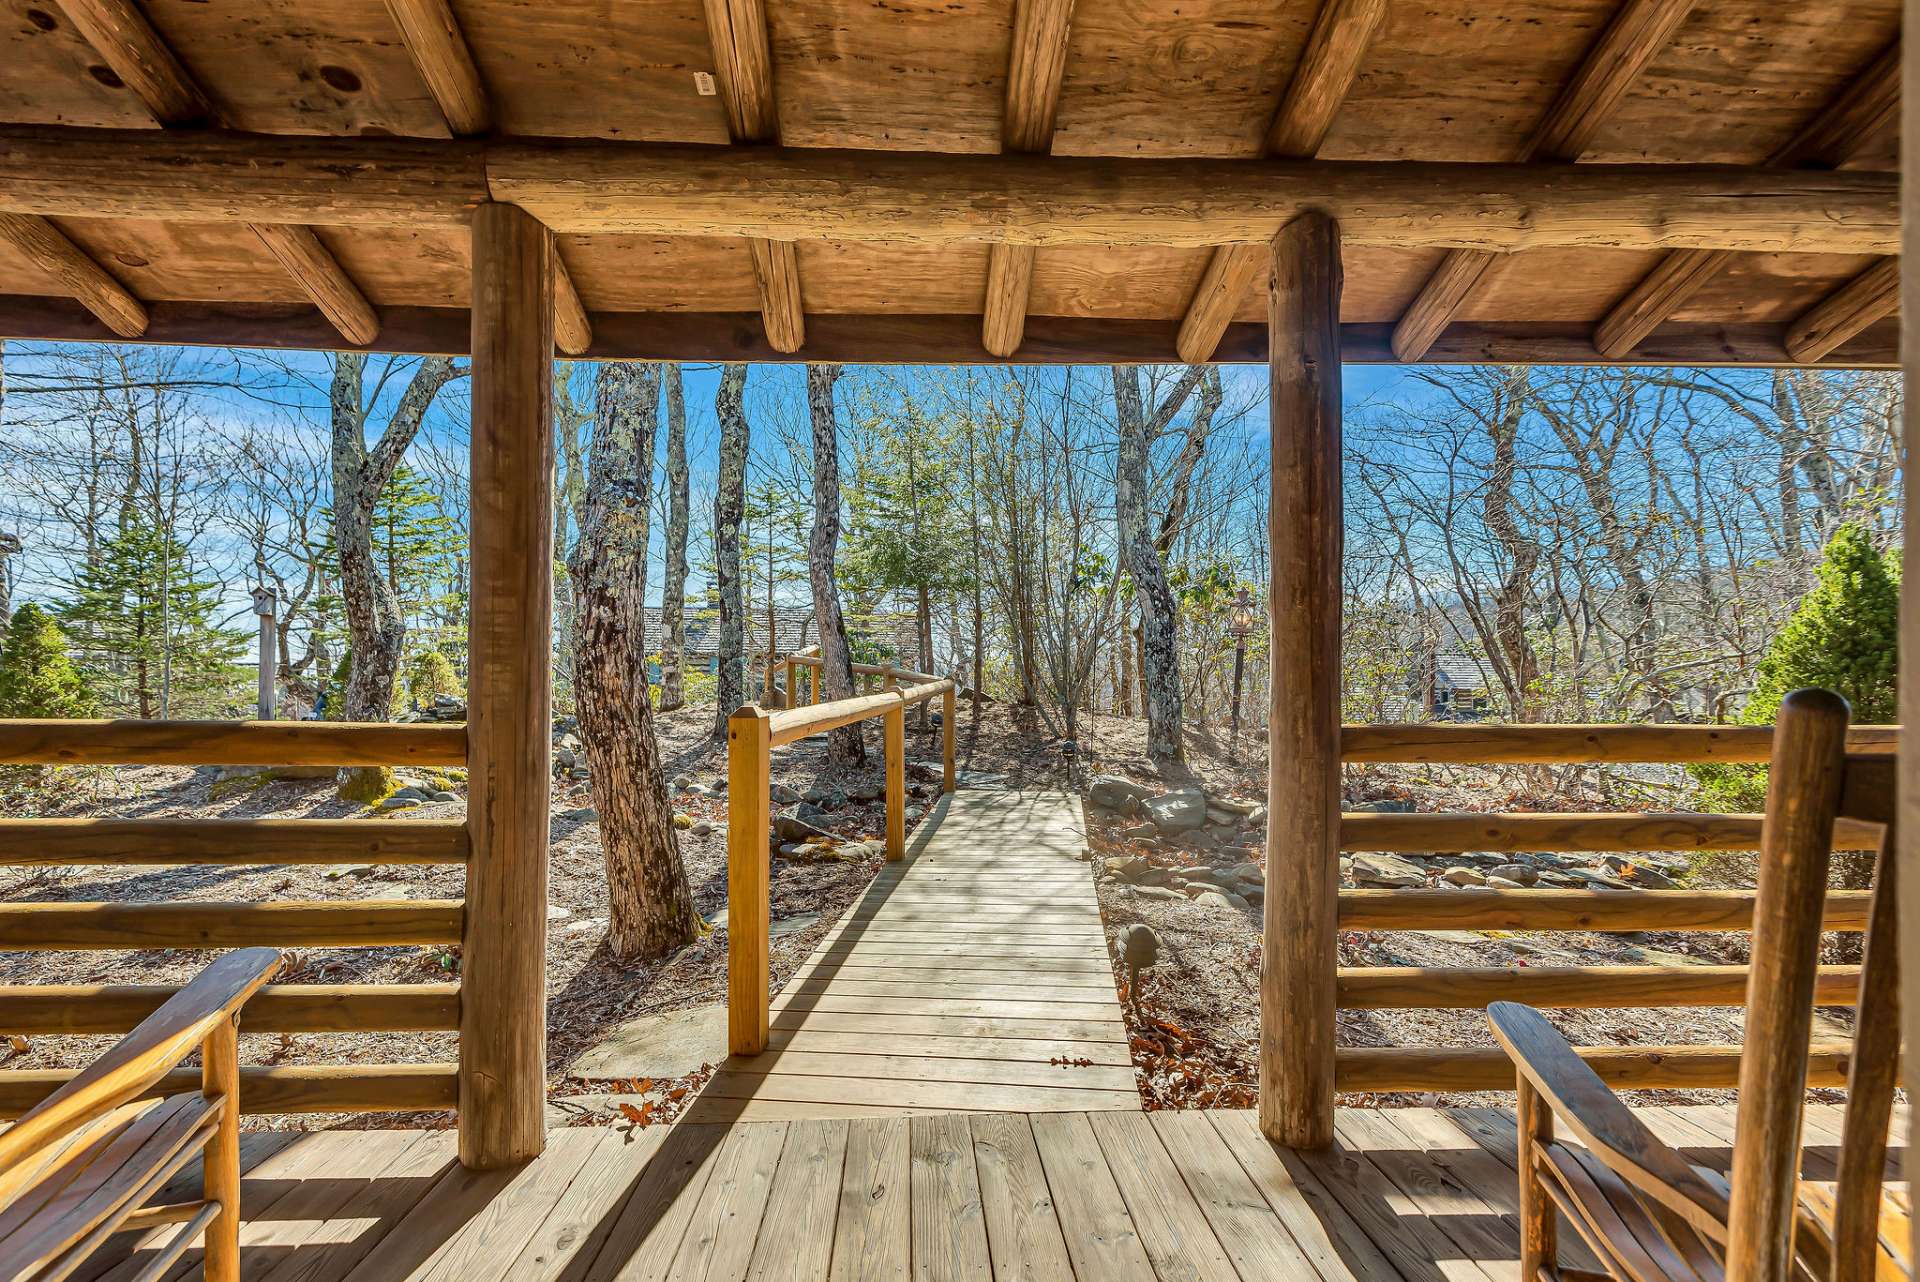 The covered front porch leads to a natural landscaped setting.